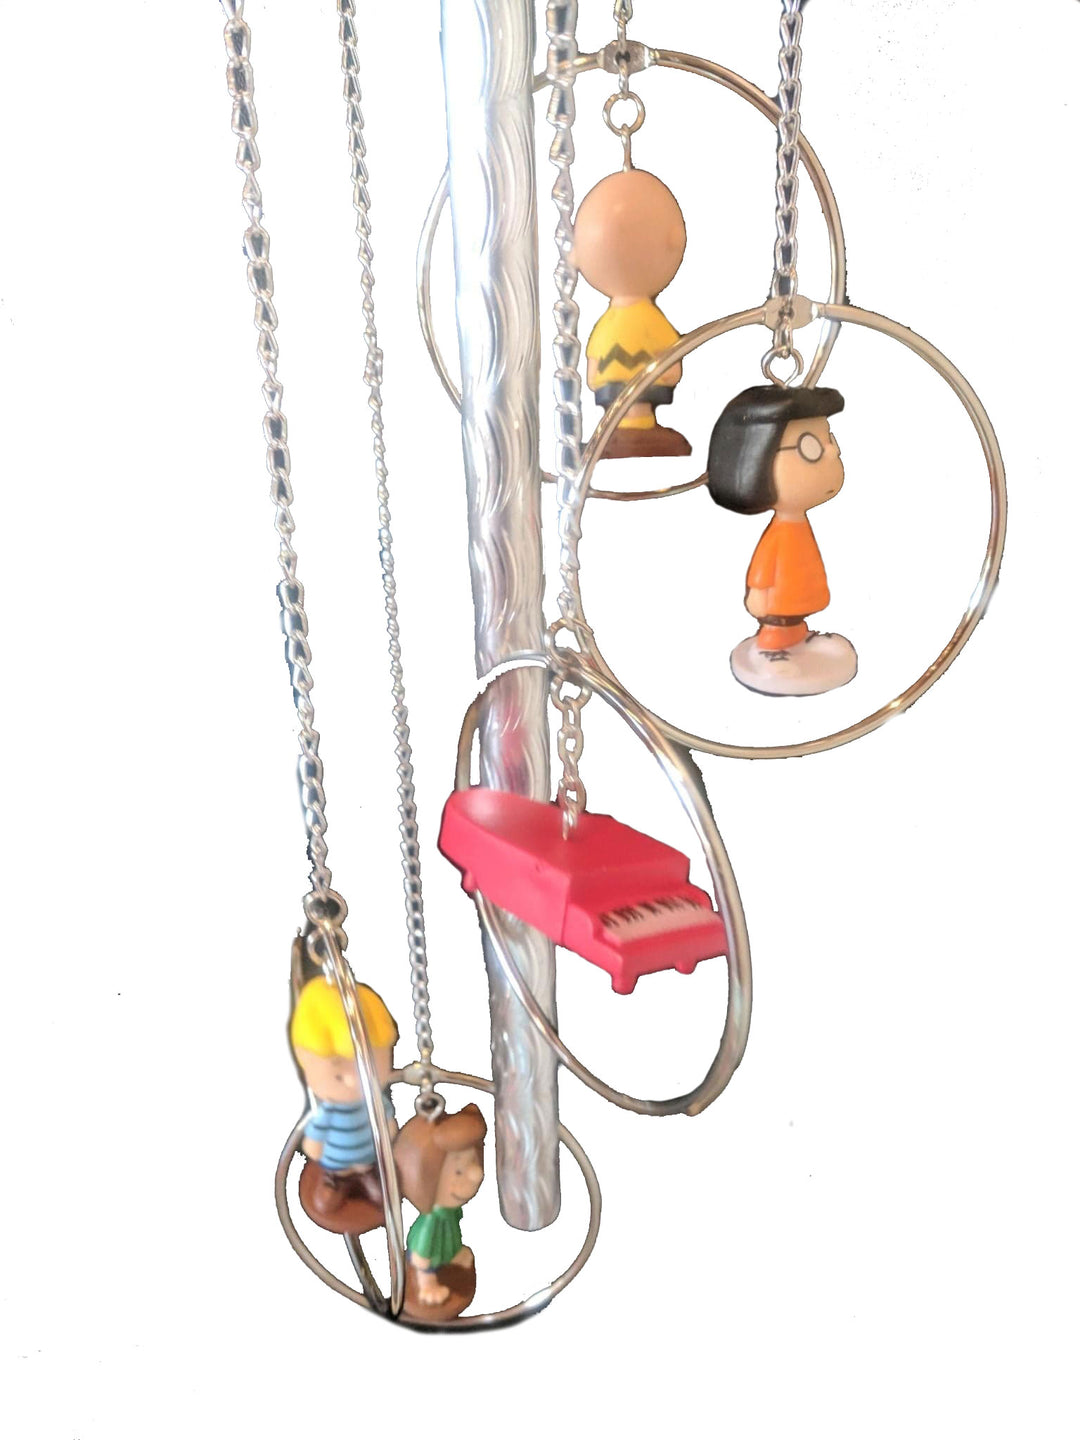 Peanuts Characters Wind Chime | Schroeder's Piano | Good Quality and Handmade Wind Chime | The Peanuts Movie Lovers | Perfect, Unique Gift for Kids | Yard Decor | Shipping Included